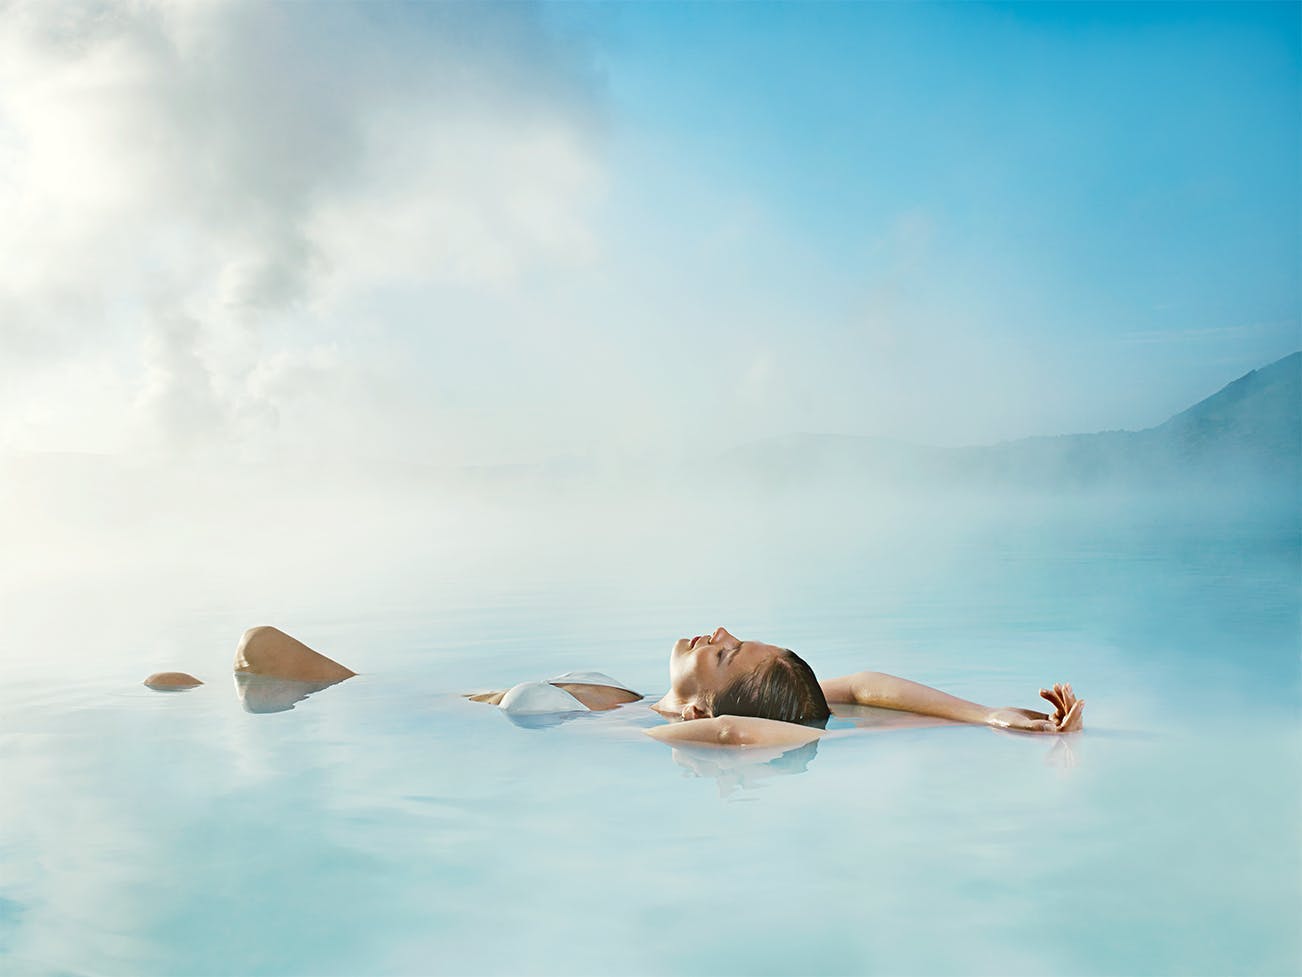 One of the best ways to introduce yourself to Iceland is by bathing in the magical waters of the Blue Lagoon, the famous spa on the Reykjanes Peninsula.